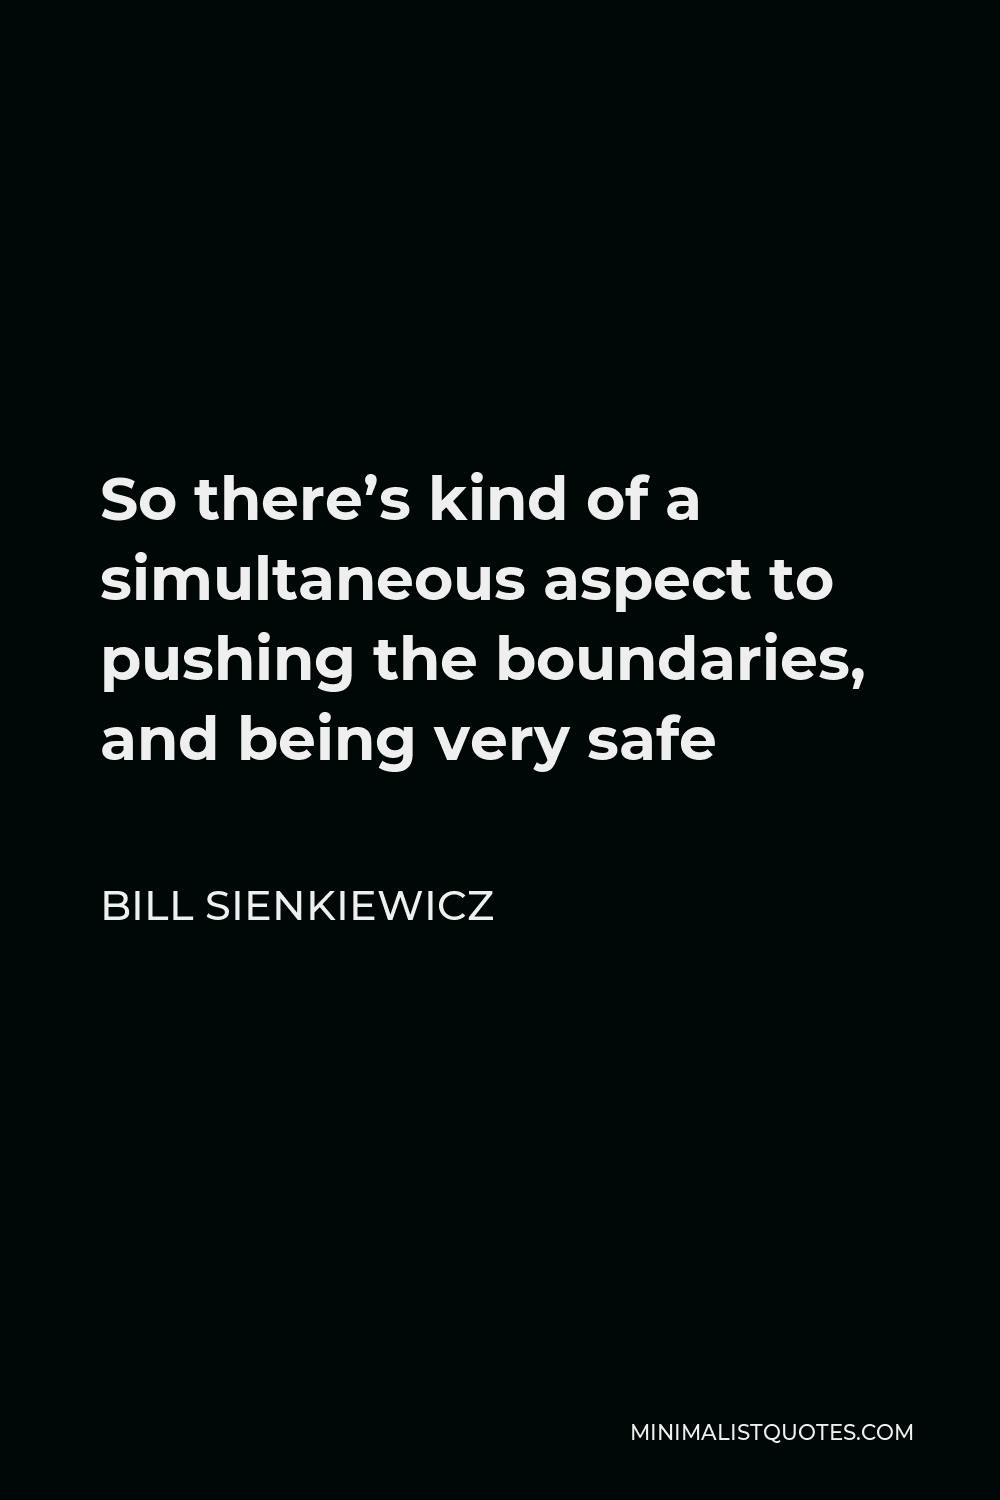 Bill Sienkiewicz Quote - So there’s kind of a simultaneous aspect to pushing the boundaries, and being very safe